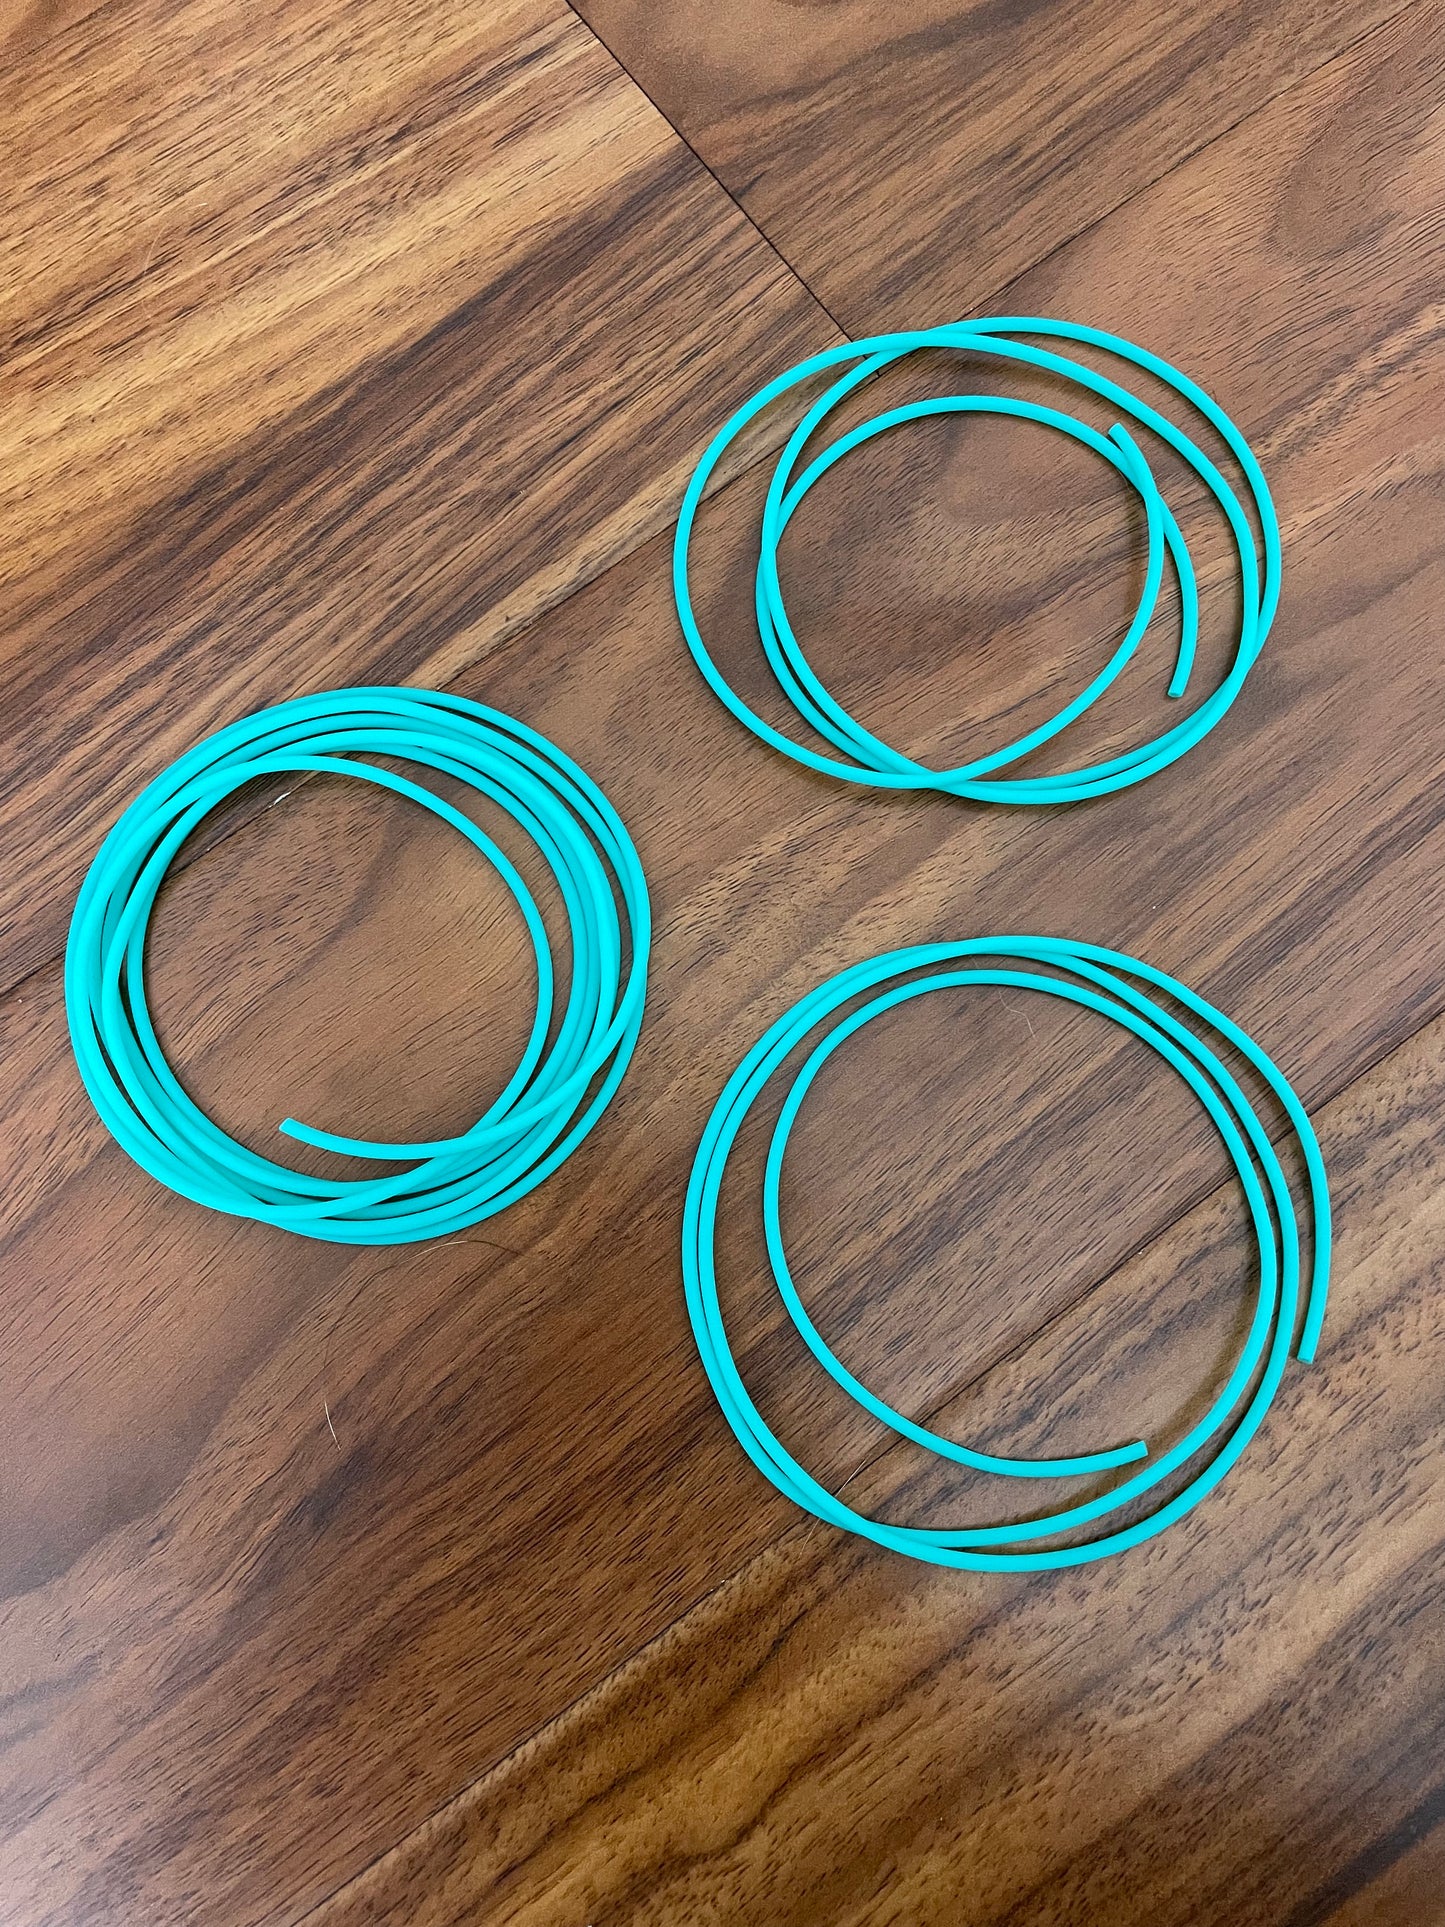 Try it on Tubing / Stitch Holder Cords - Teal